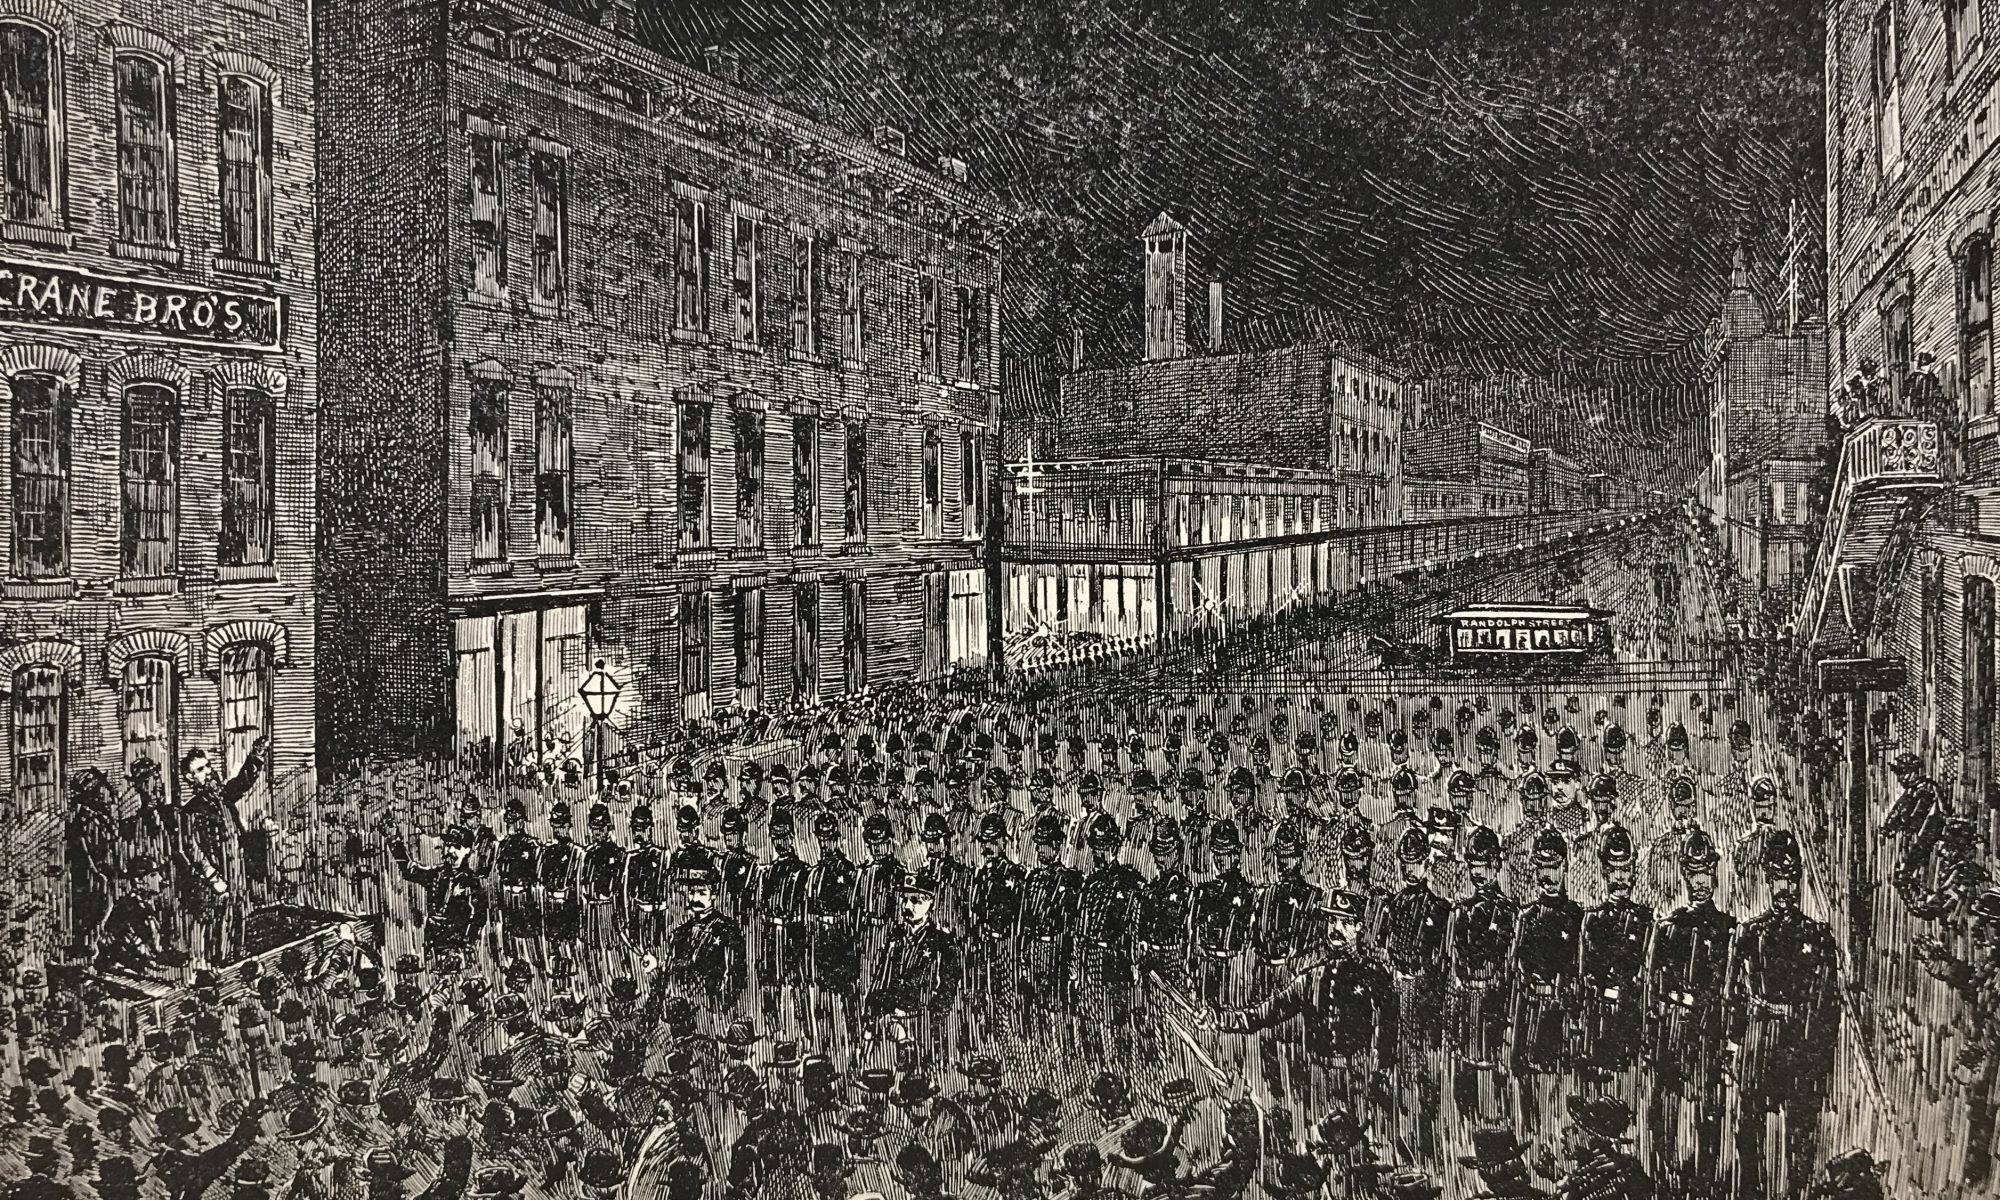 Illustration of the rally, and approaching police, in Haymarket Square the evening of May 4, 1886.